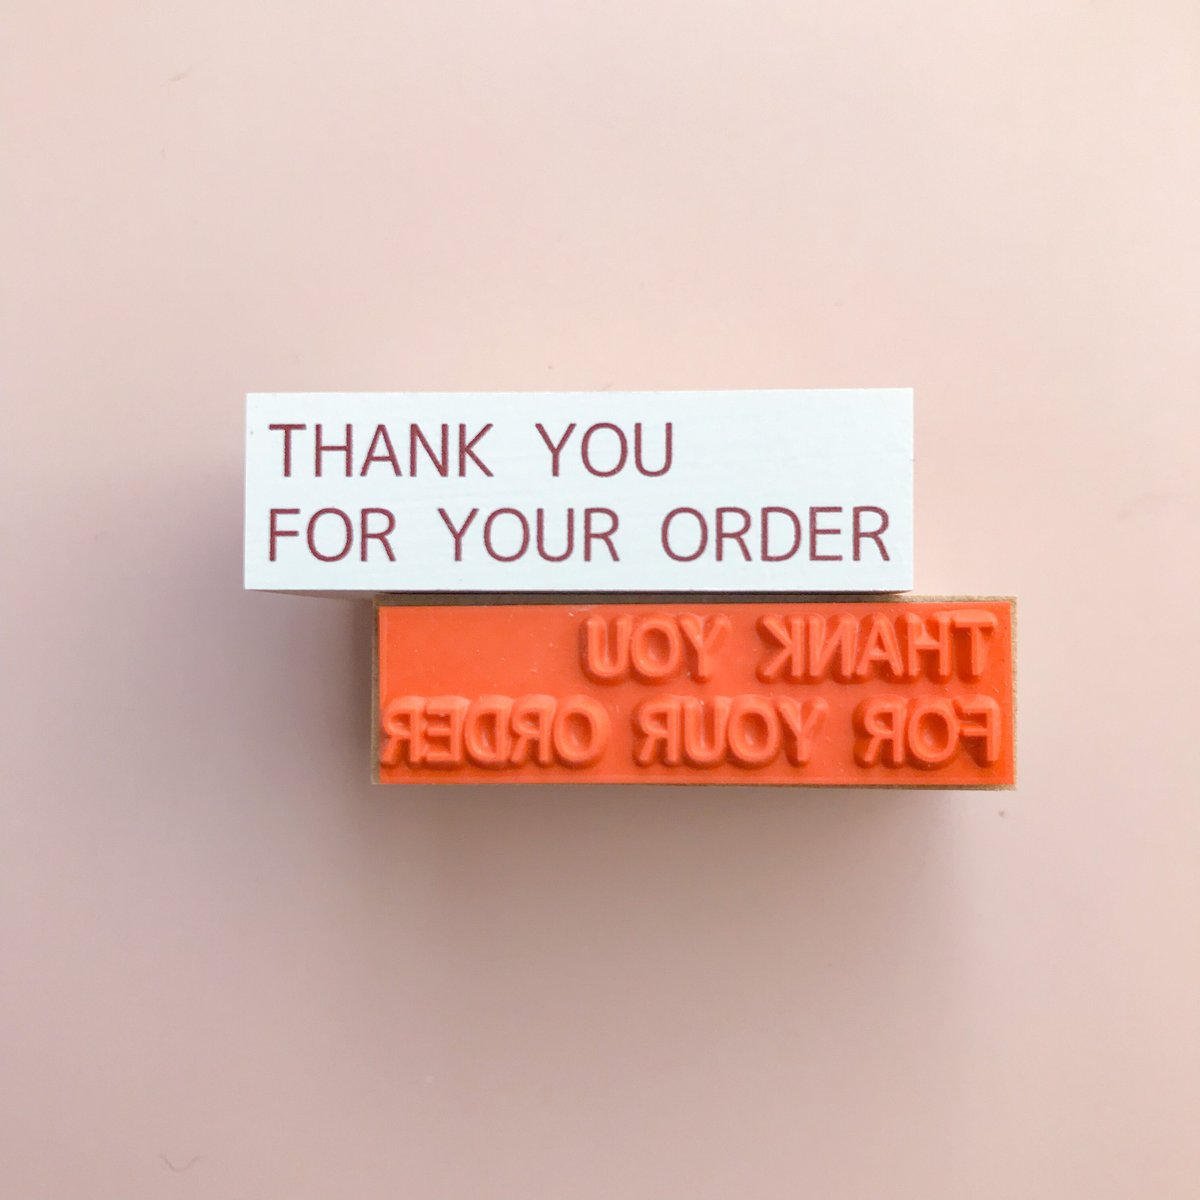 【052】 THANK YOU FOR YOUR ORDER　ラバースタンプ